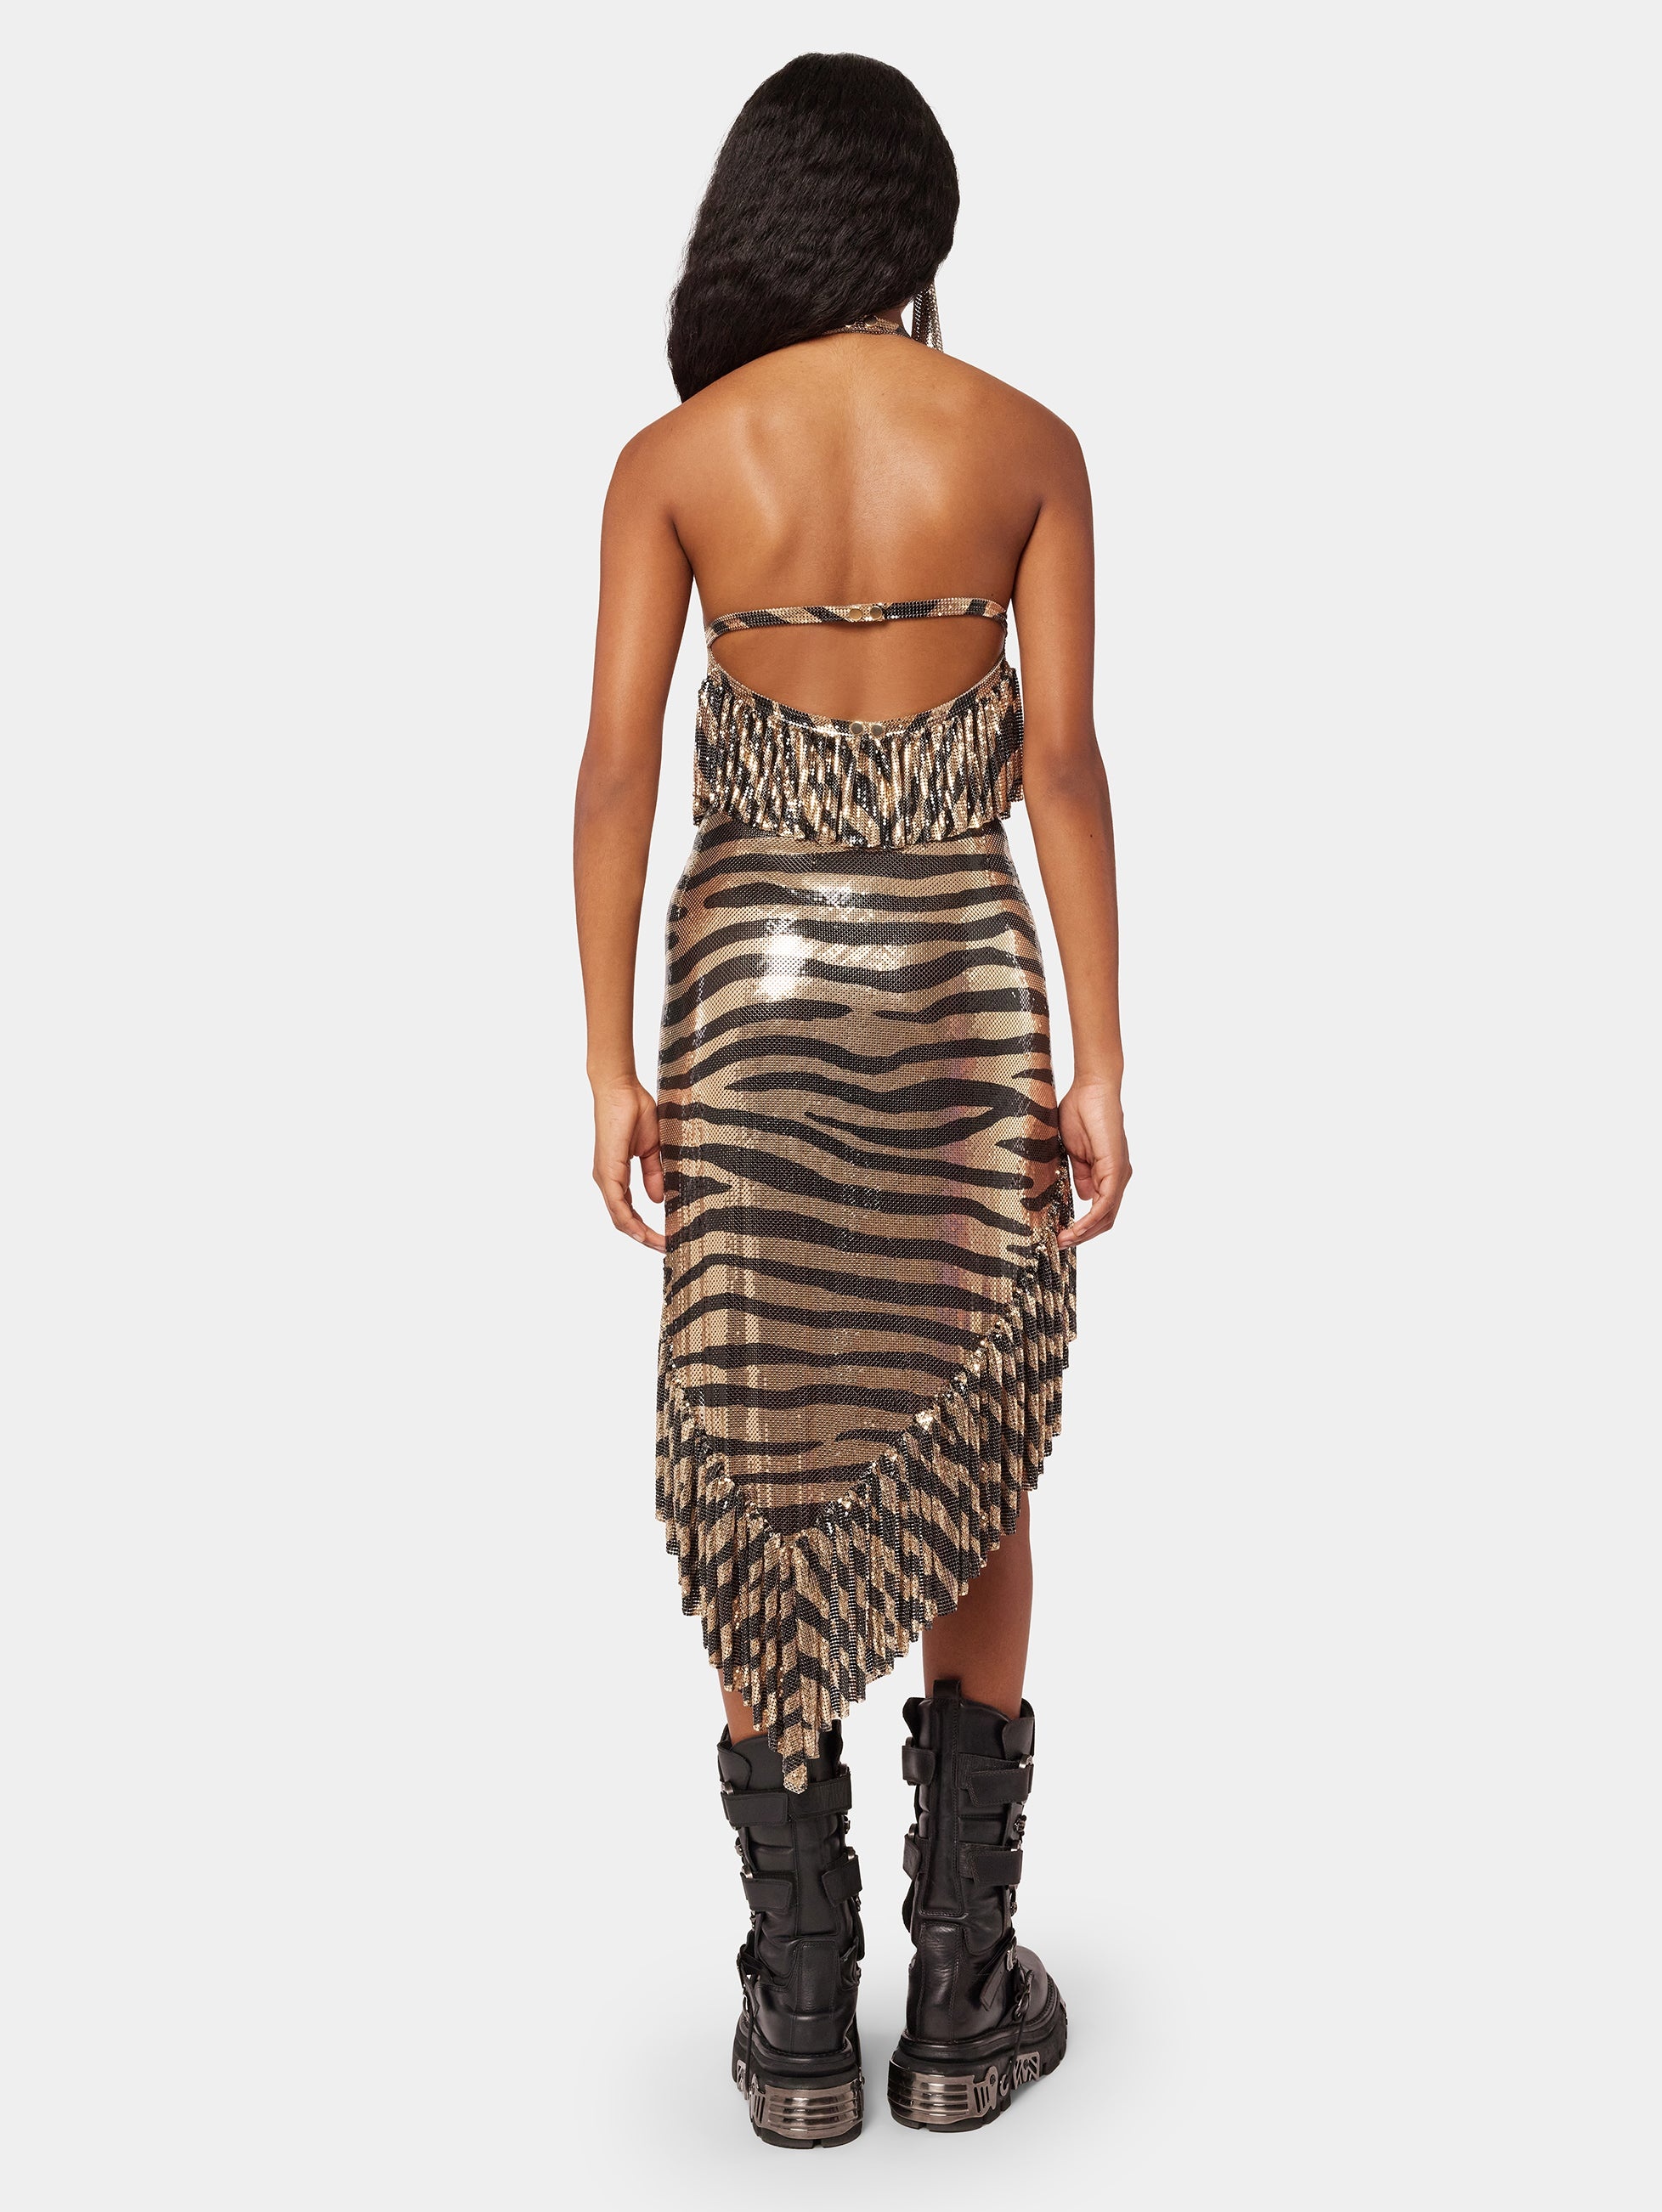 LONG PIXEL SKIRT WITH TIGER PRINT - 6